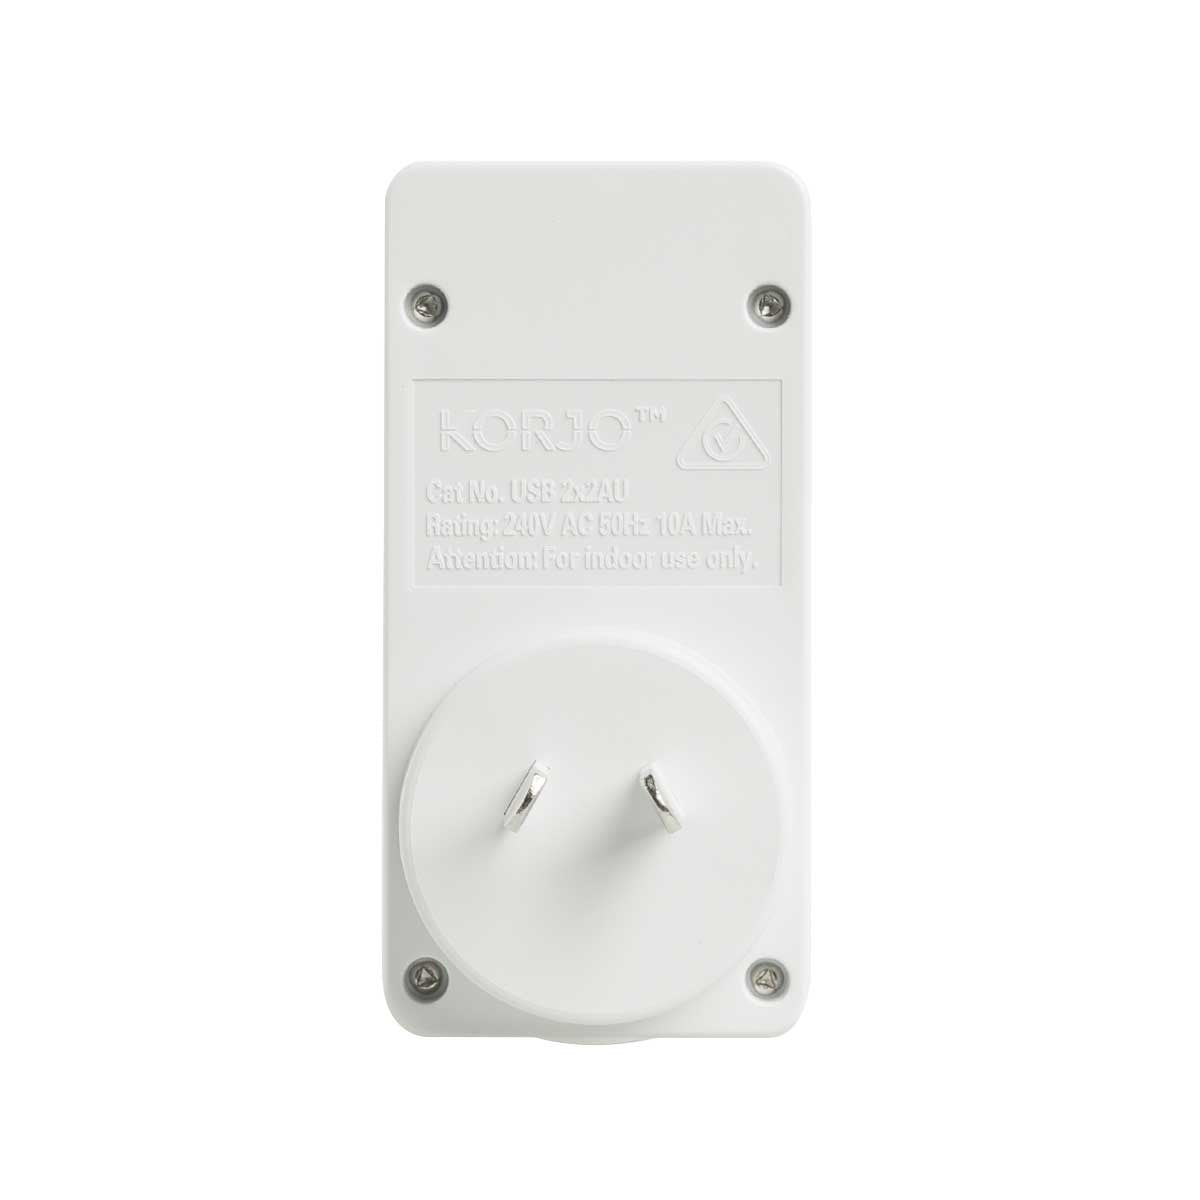 Korjo 2 port USB charger and adaptor Australia and NZ to Italy, Switzerland